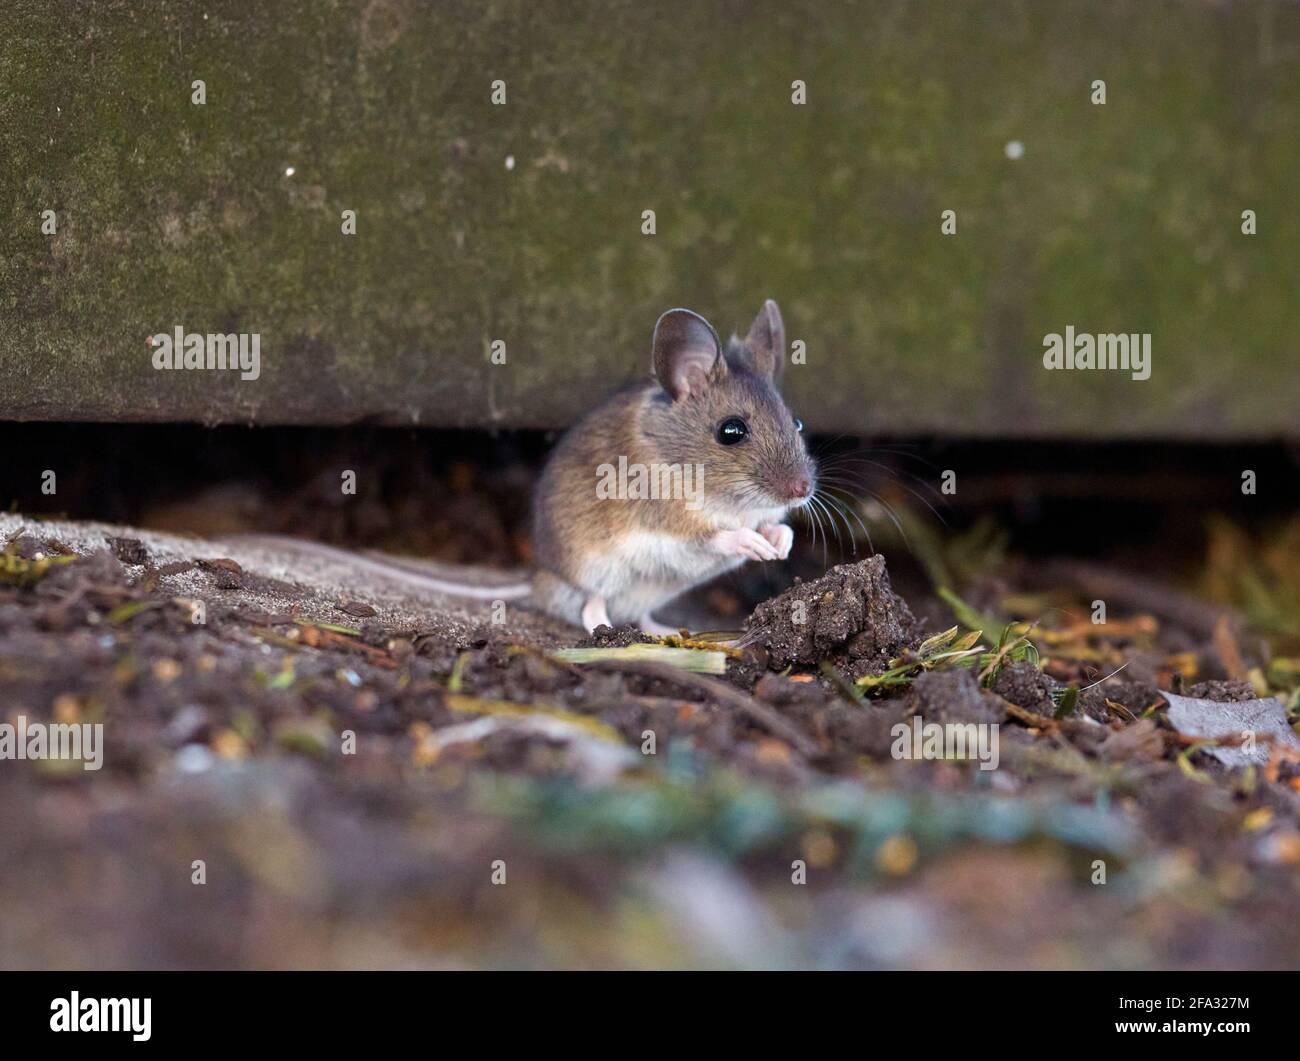 Field Mouse. St Mary's Churchyard, East Molesey, Surrey, UK. Stock Photo